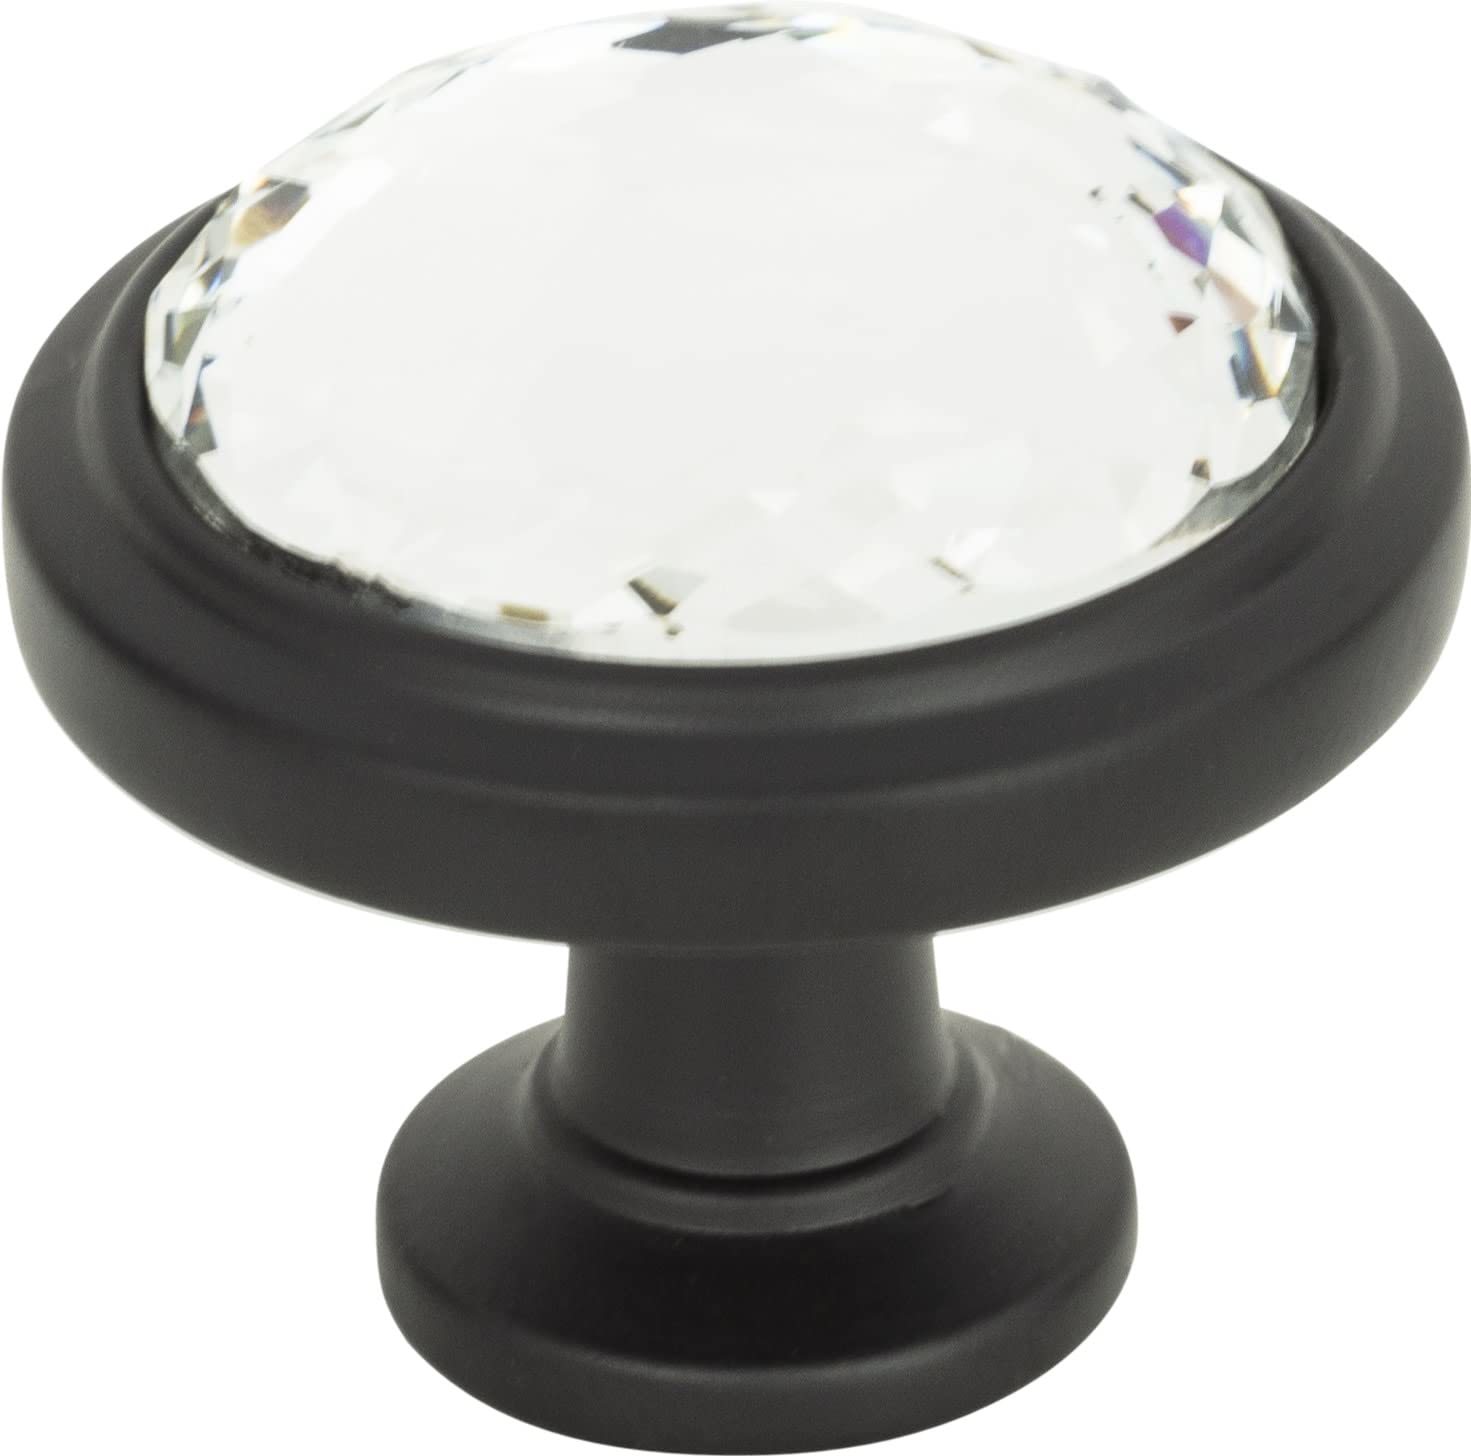 Primary image for Atlas Homewares 343-CH Legacy Crystal Round Knob, Polished Chrome